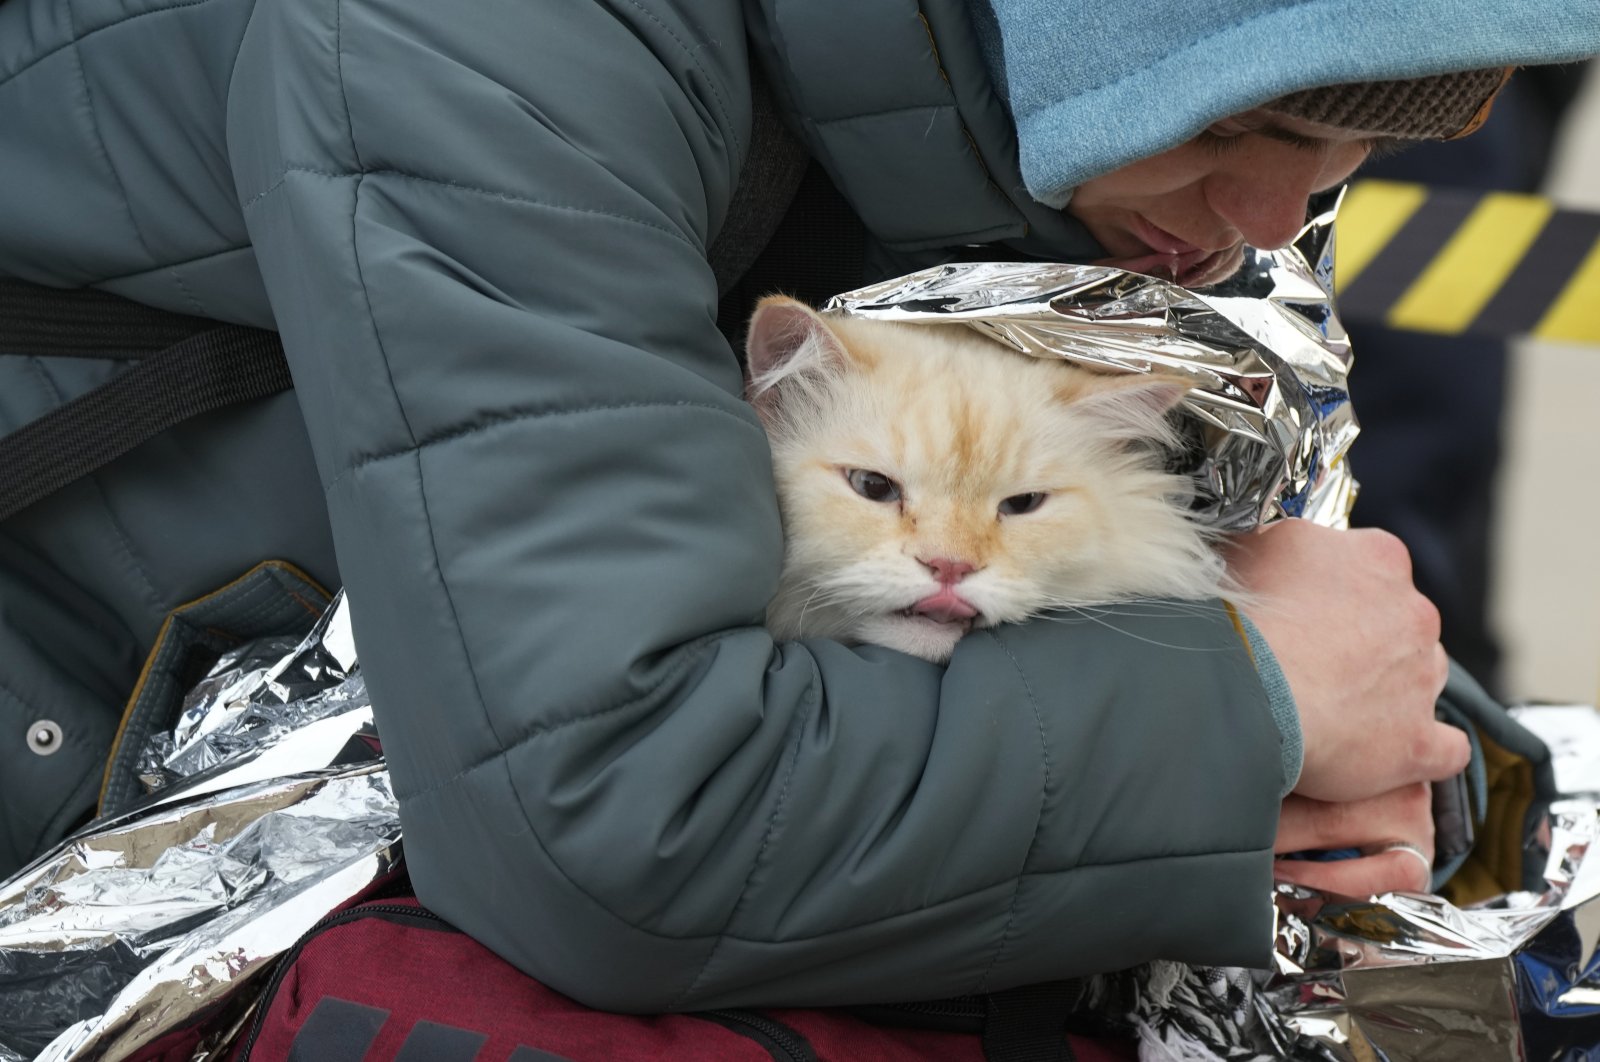 Ukrainian Anastasia Klimenko covers a cat named Amur with a blanket after fleeing the war in neighboring Ukraine, at the border crossing in Palanca, Moldova, Thursday, March 10, 2022. (AP Photo/Sergei Grits)